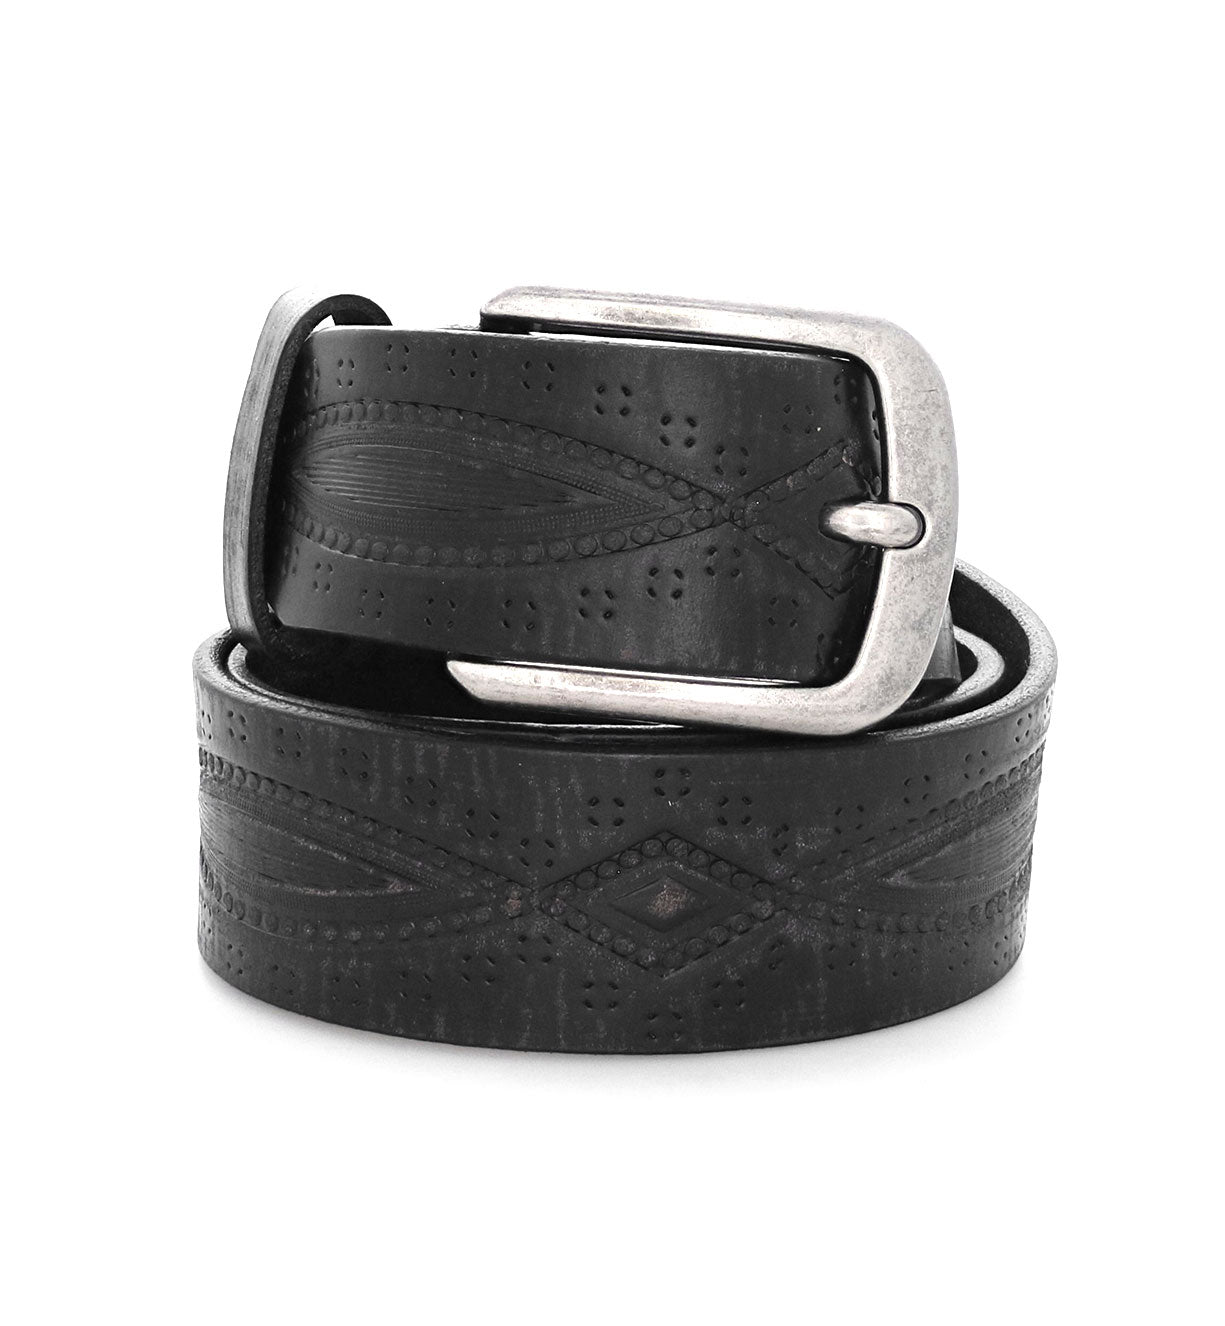 An Arsenal belt with a Bed Stu buckle on a white background.